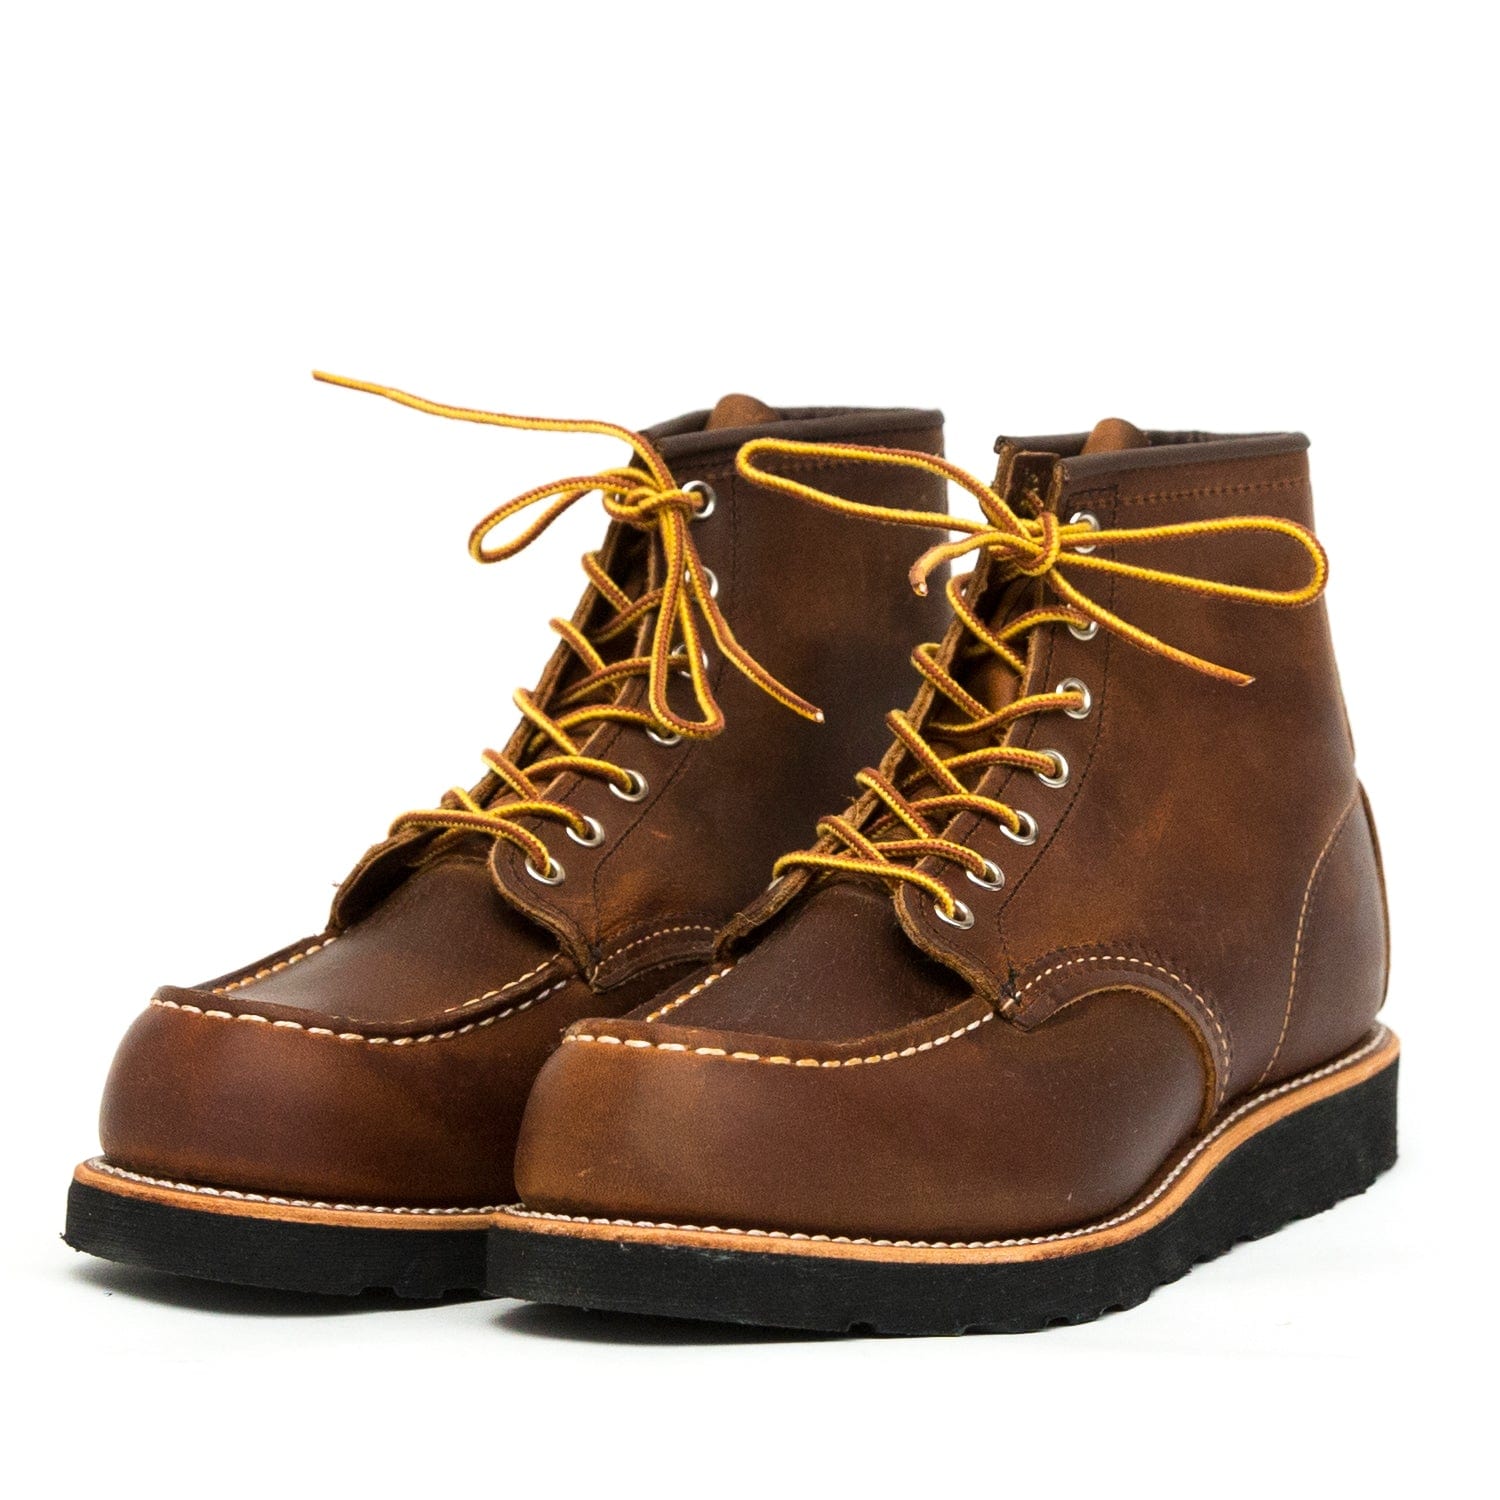 Red Wing Heritage Men's 875 6 Classic Moc Toe Boots 